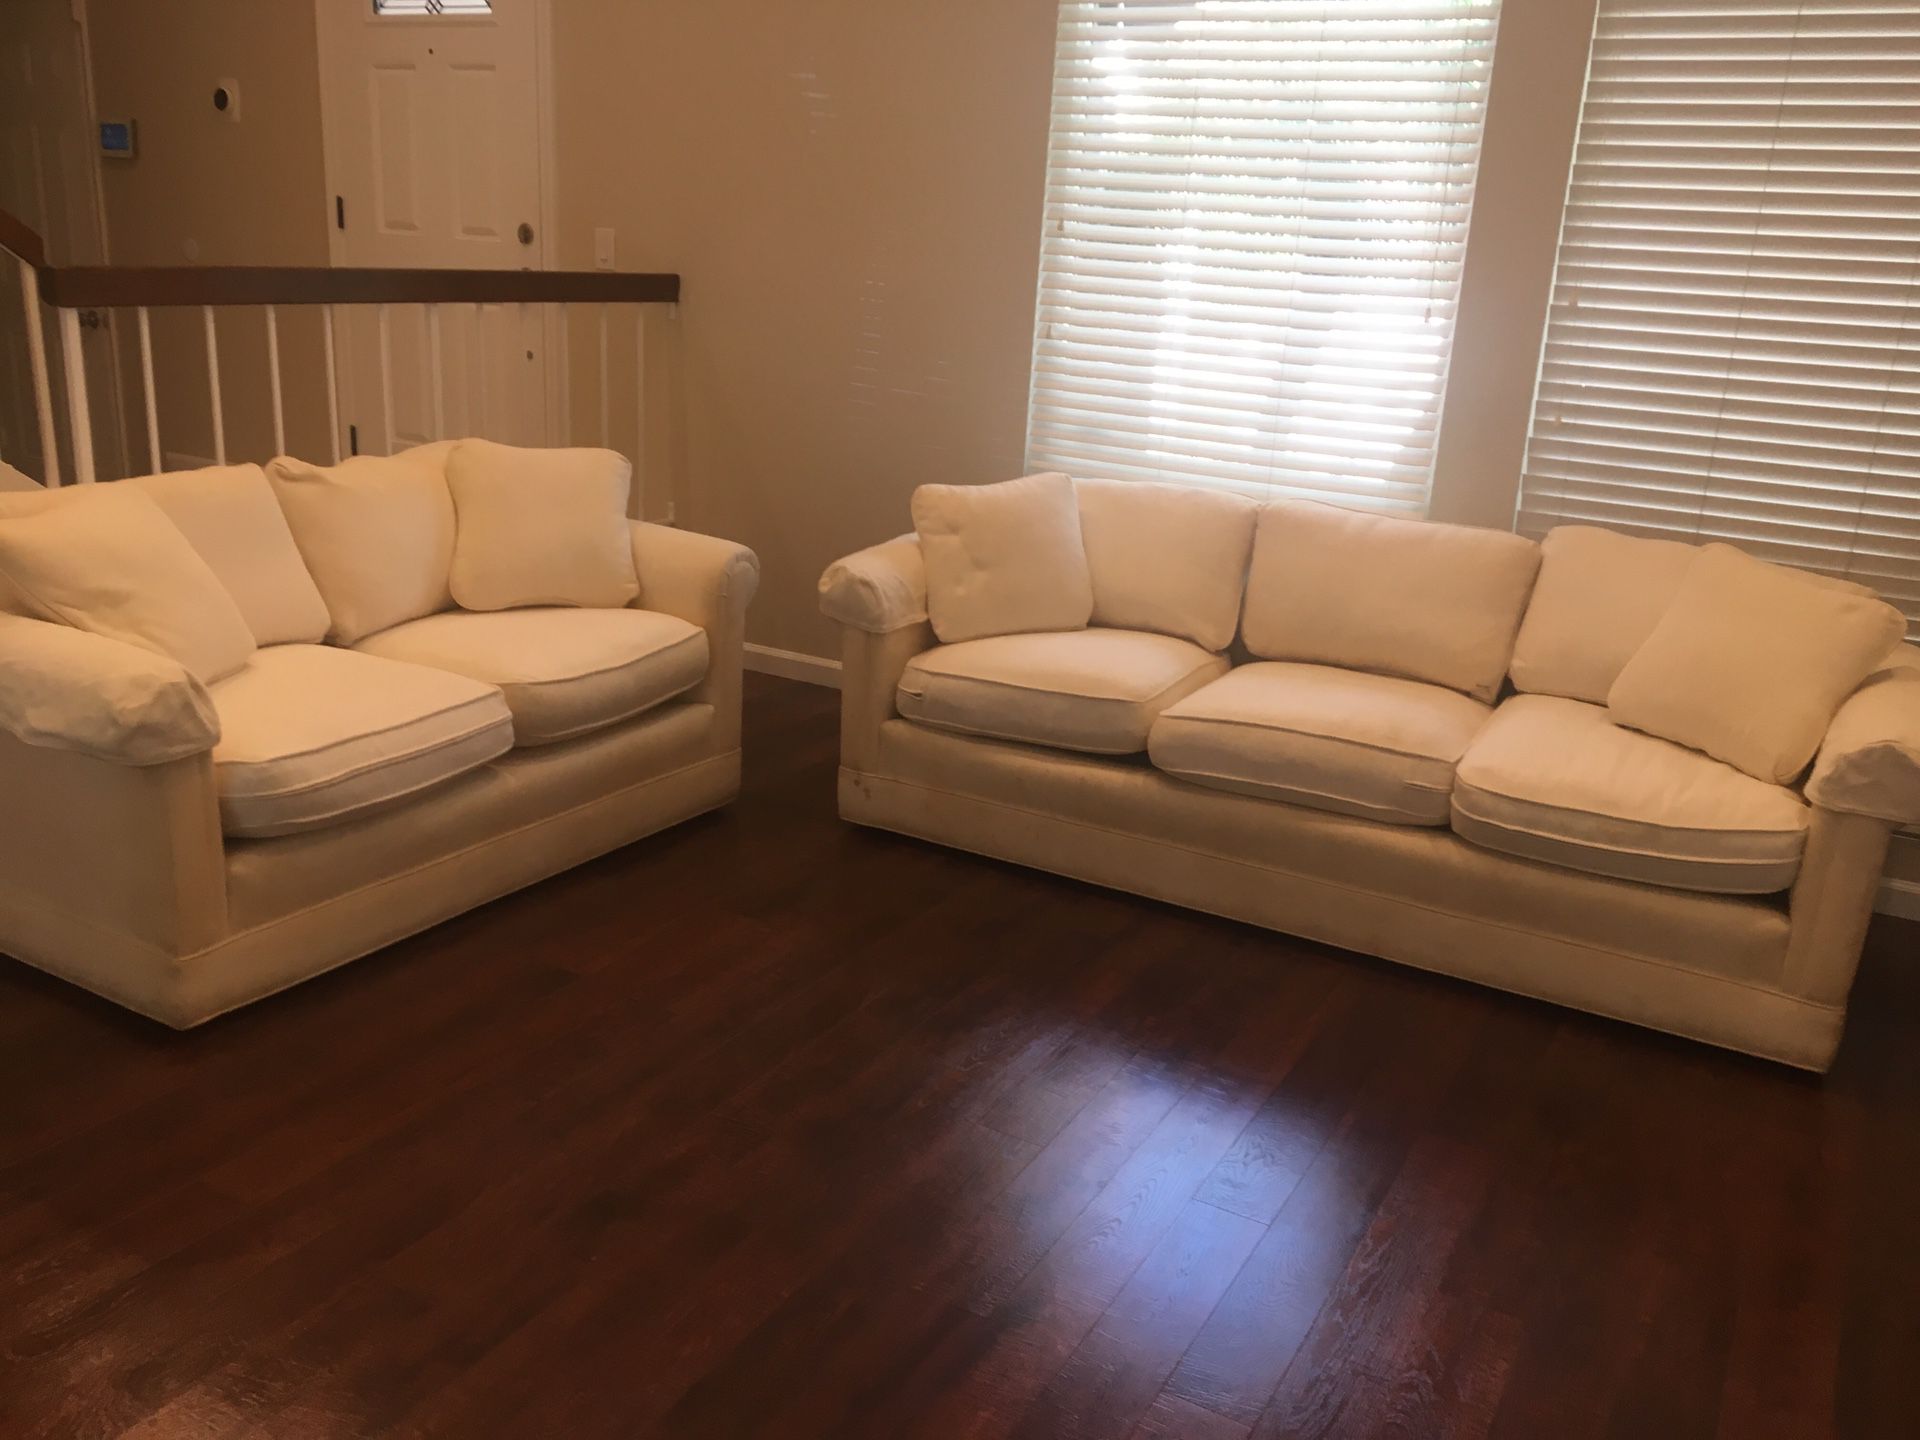 FREE sofa and loveseat with stains (Burton James)